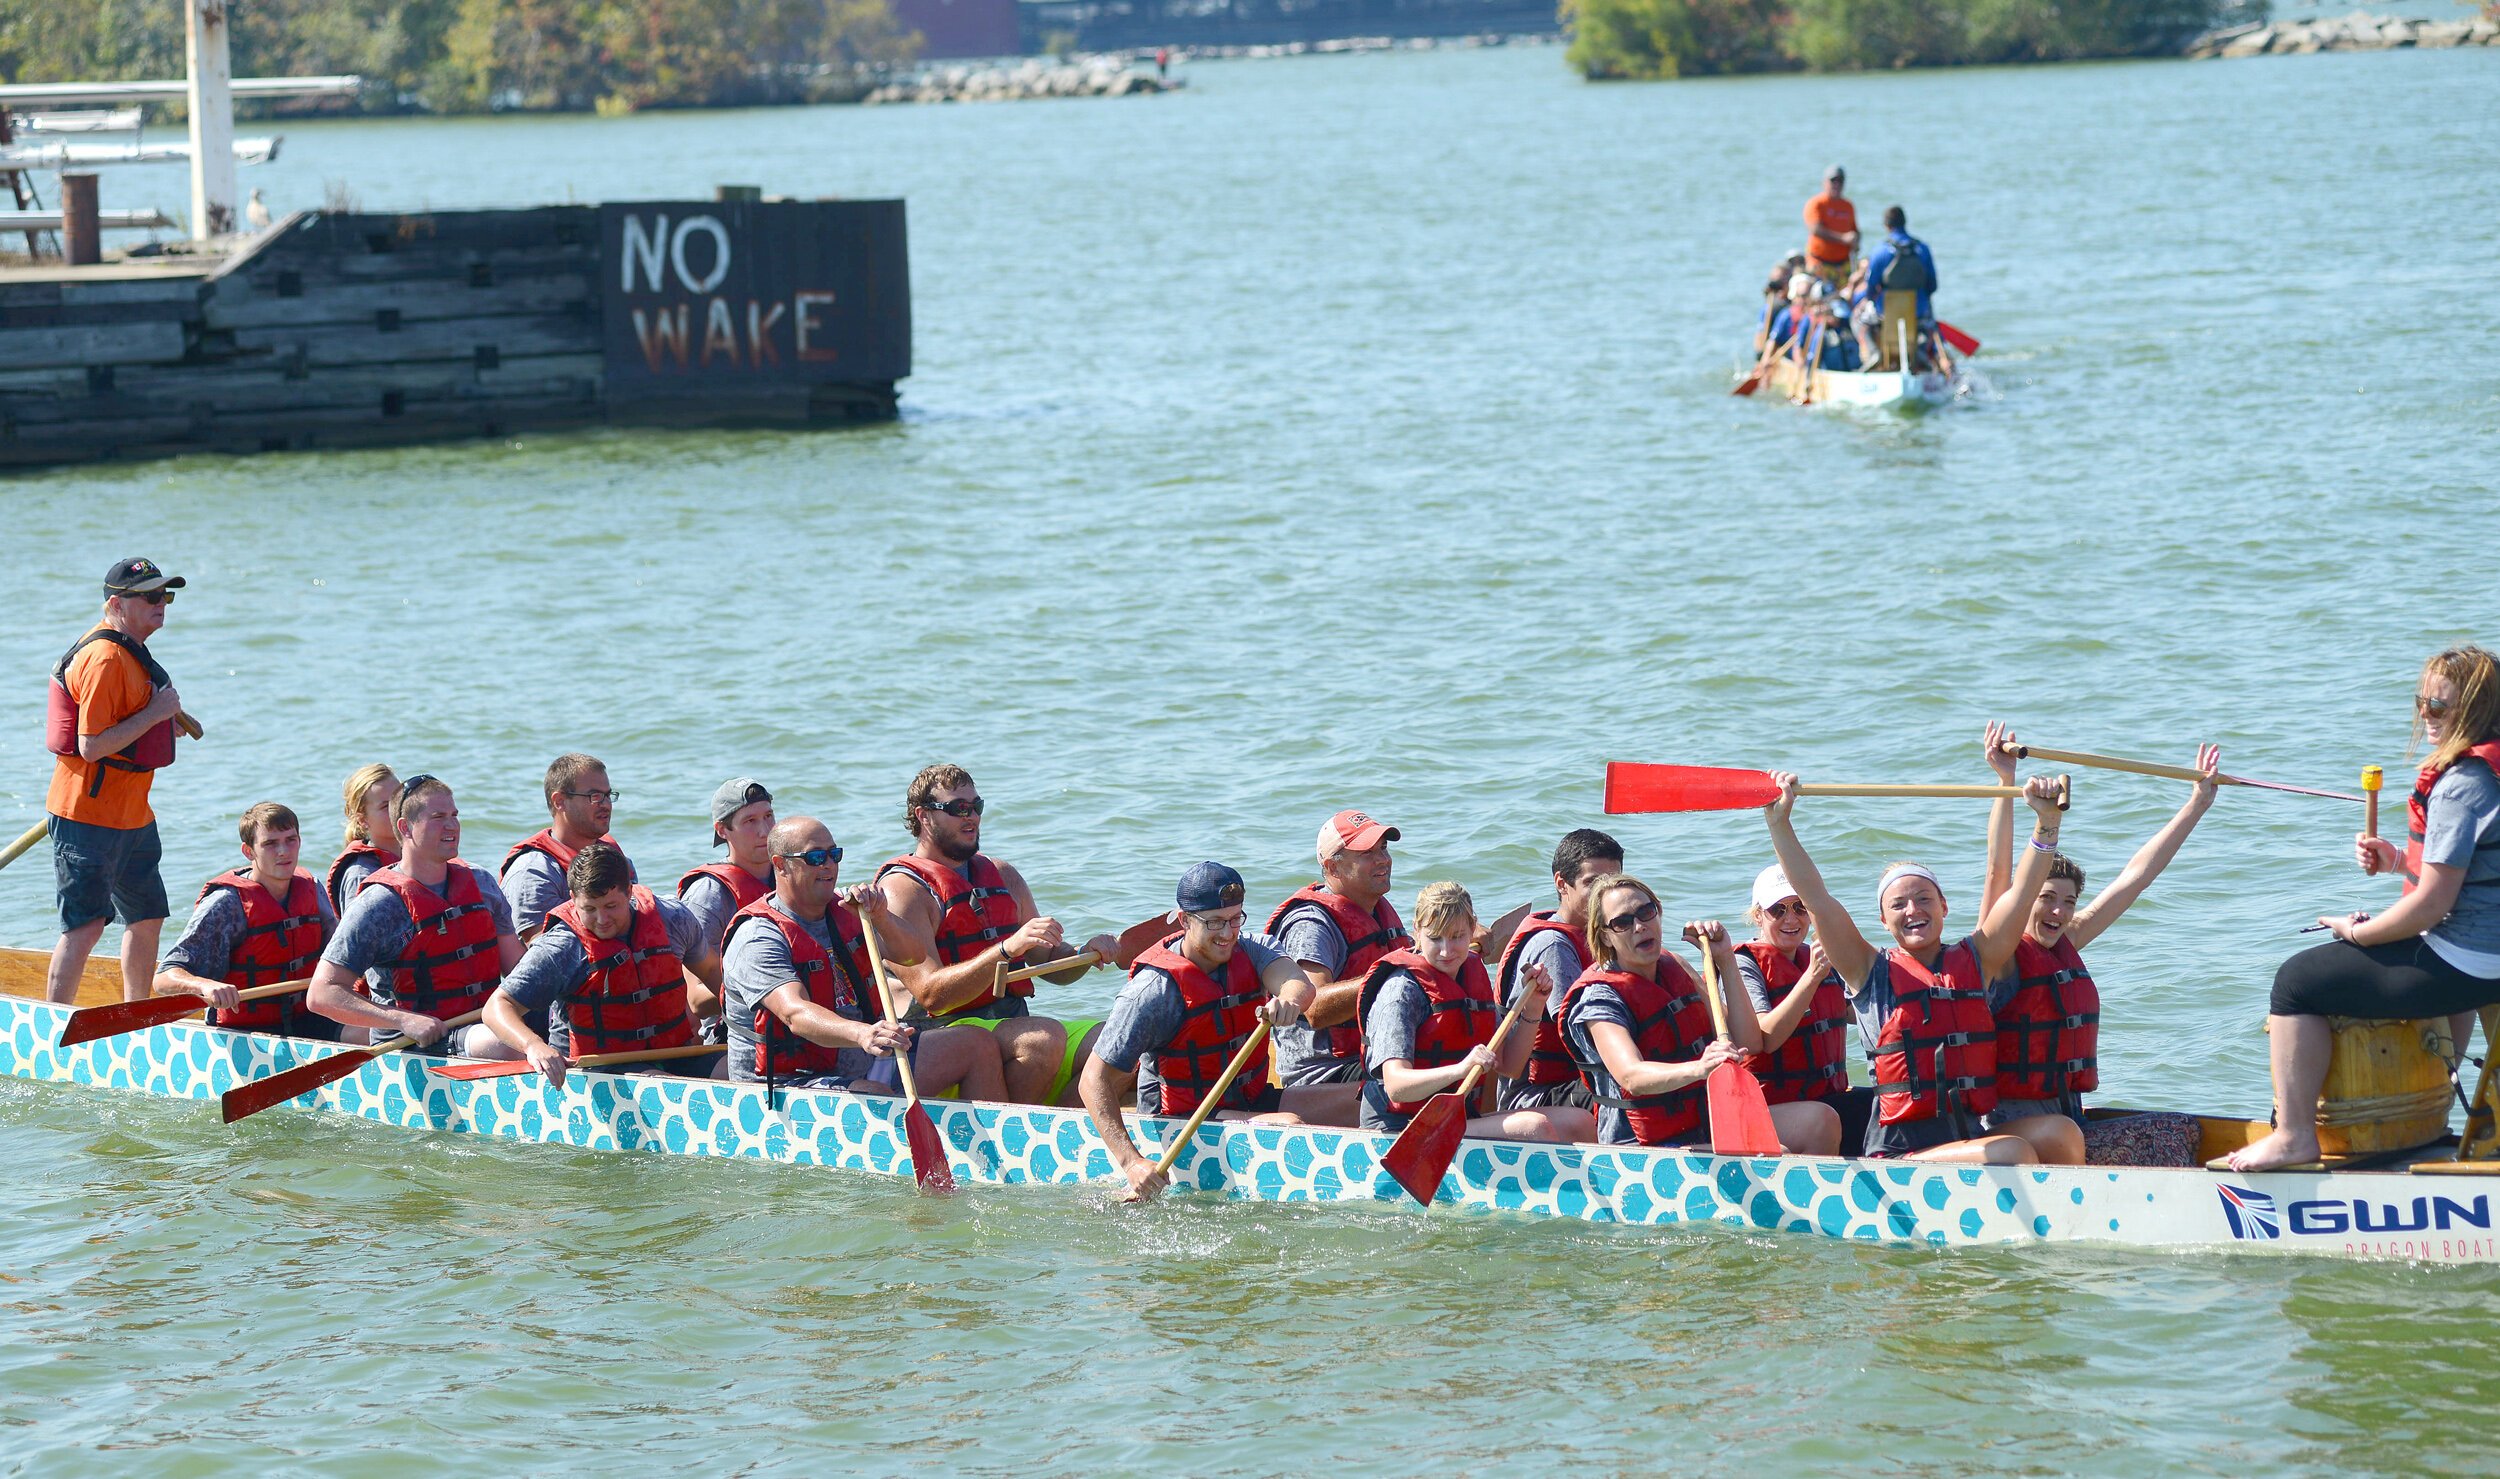 Teams of 20 paddle in dragon boats in Sandusky Bay during the 2019 Dragons & Bacon Fest.